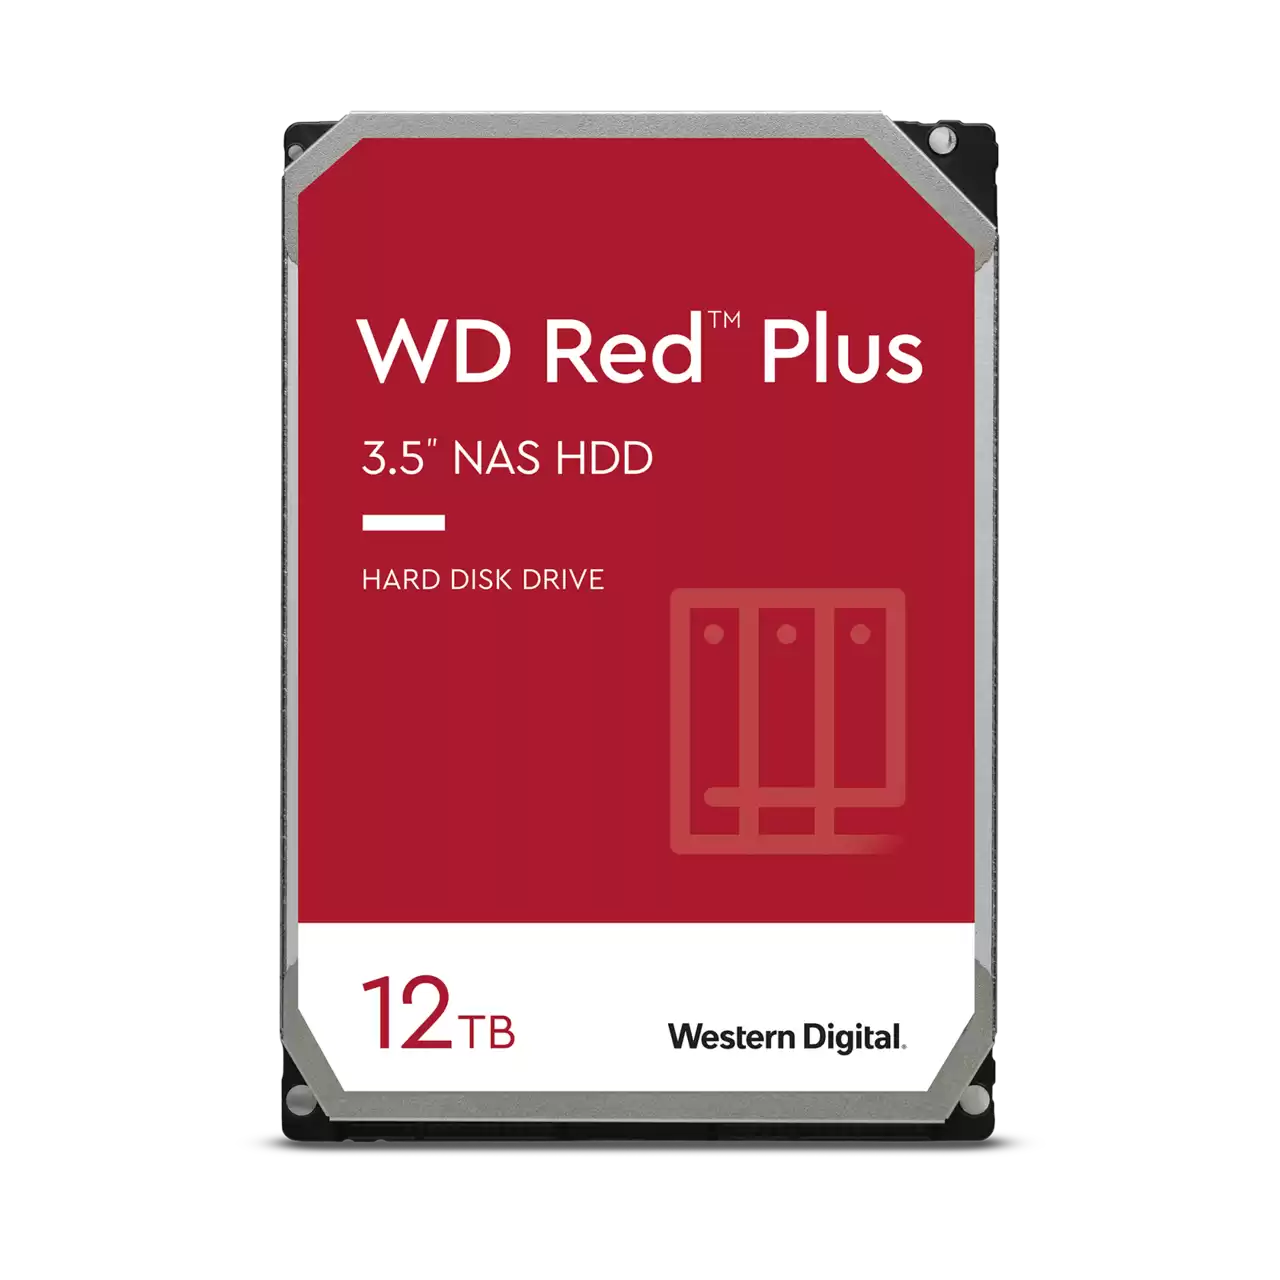 WD Red Plus 12TB 7200rpm 256MB 3.5" NAS HDD (WD120EFBX)